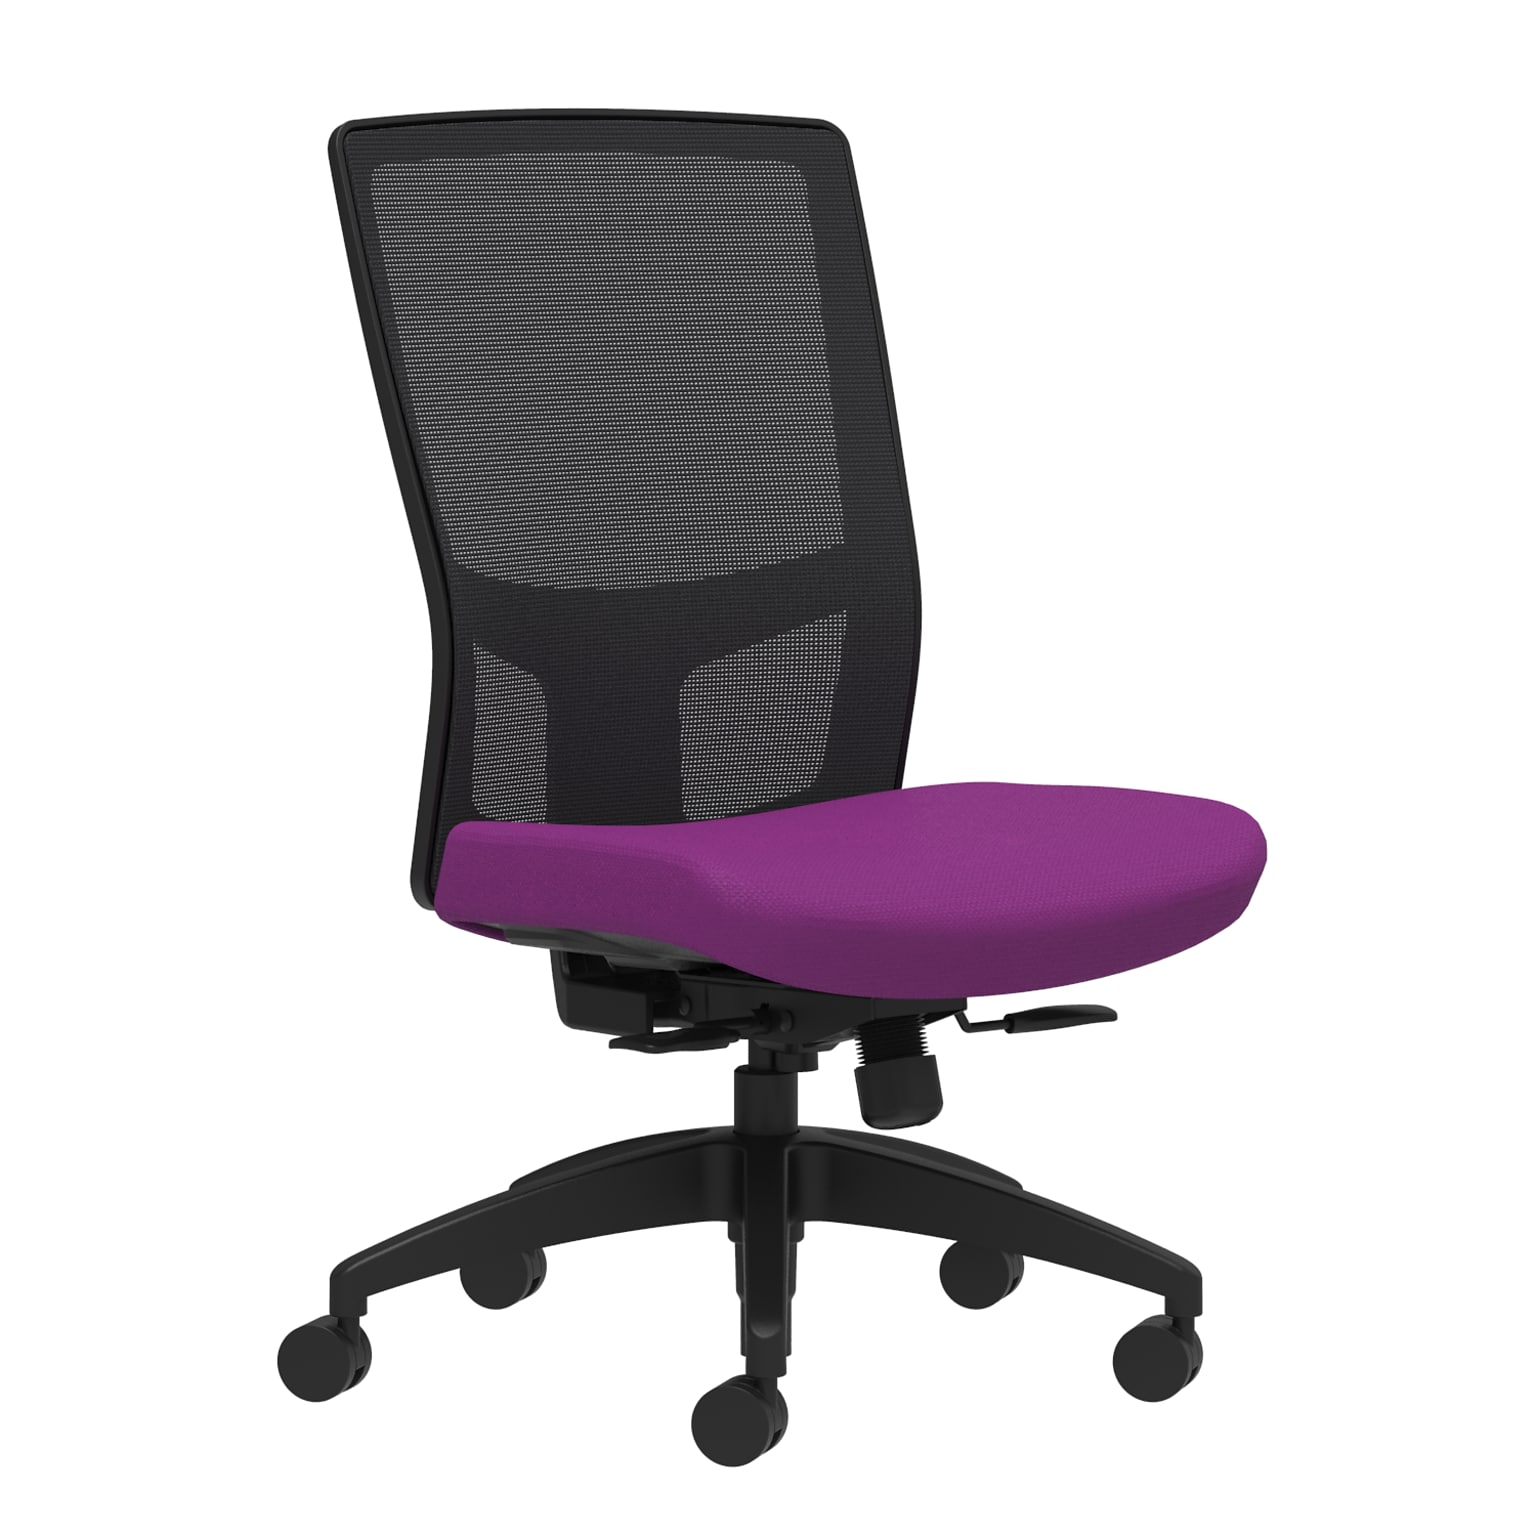 Union & Scale Workplace2.0™ Fabric Task Chair, Amethyst, Integrated Lumbar, Armless, Synchro-Tilt w/ Seat Slide Control (53612)